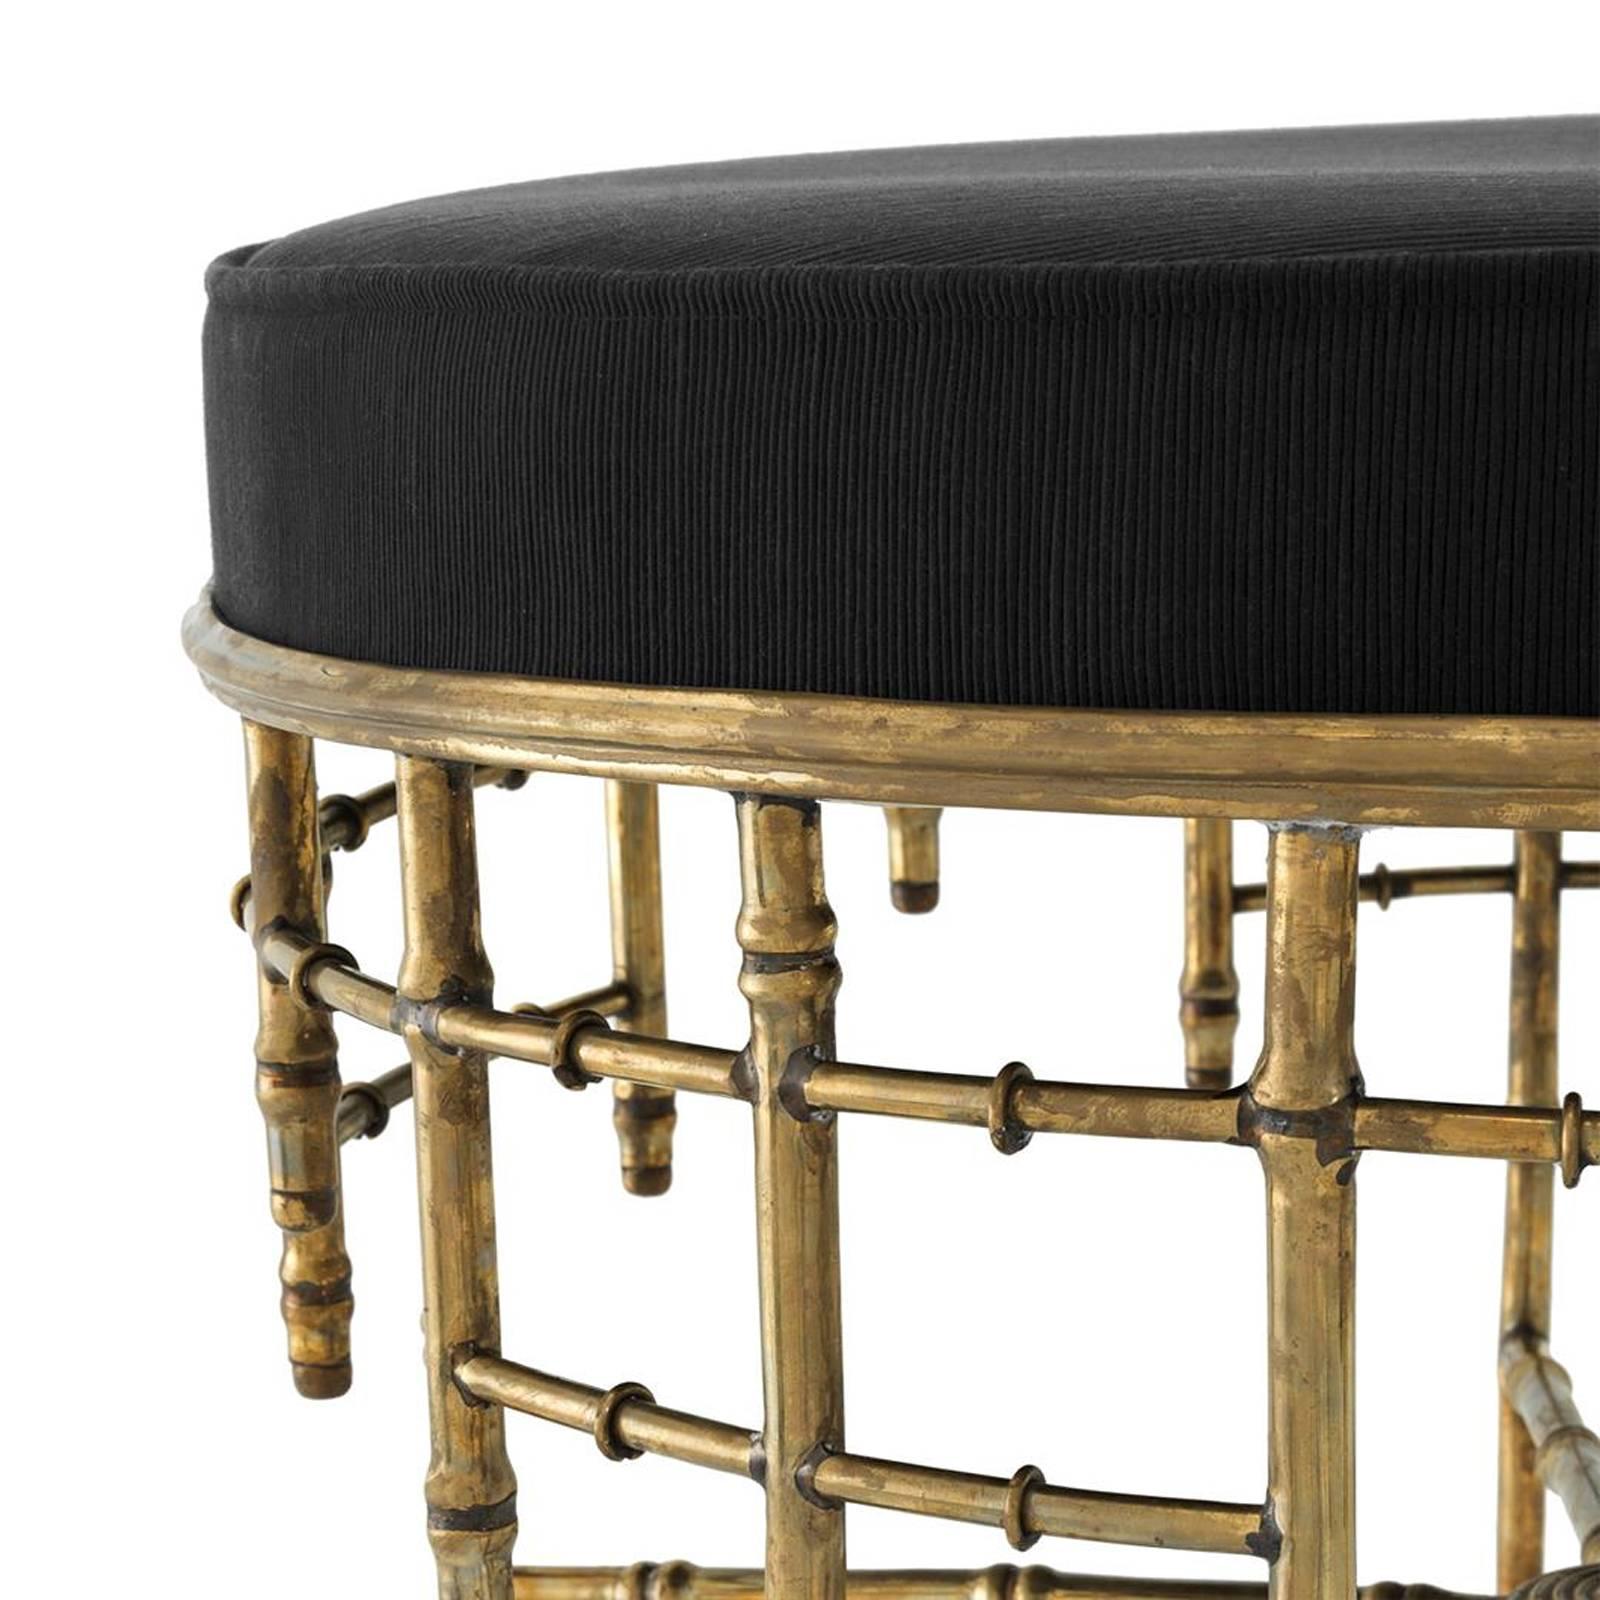 Contemporary Reed Large Stool in Vintage Brass Finish and Black Velvet Seat